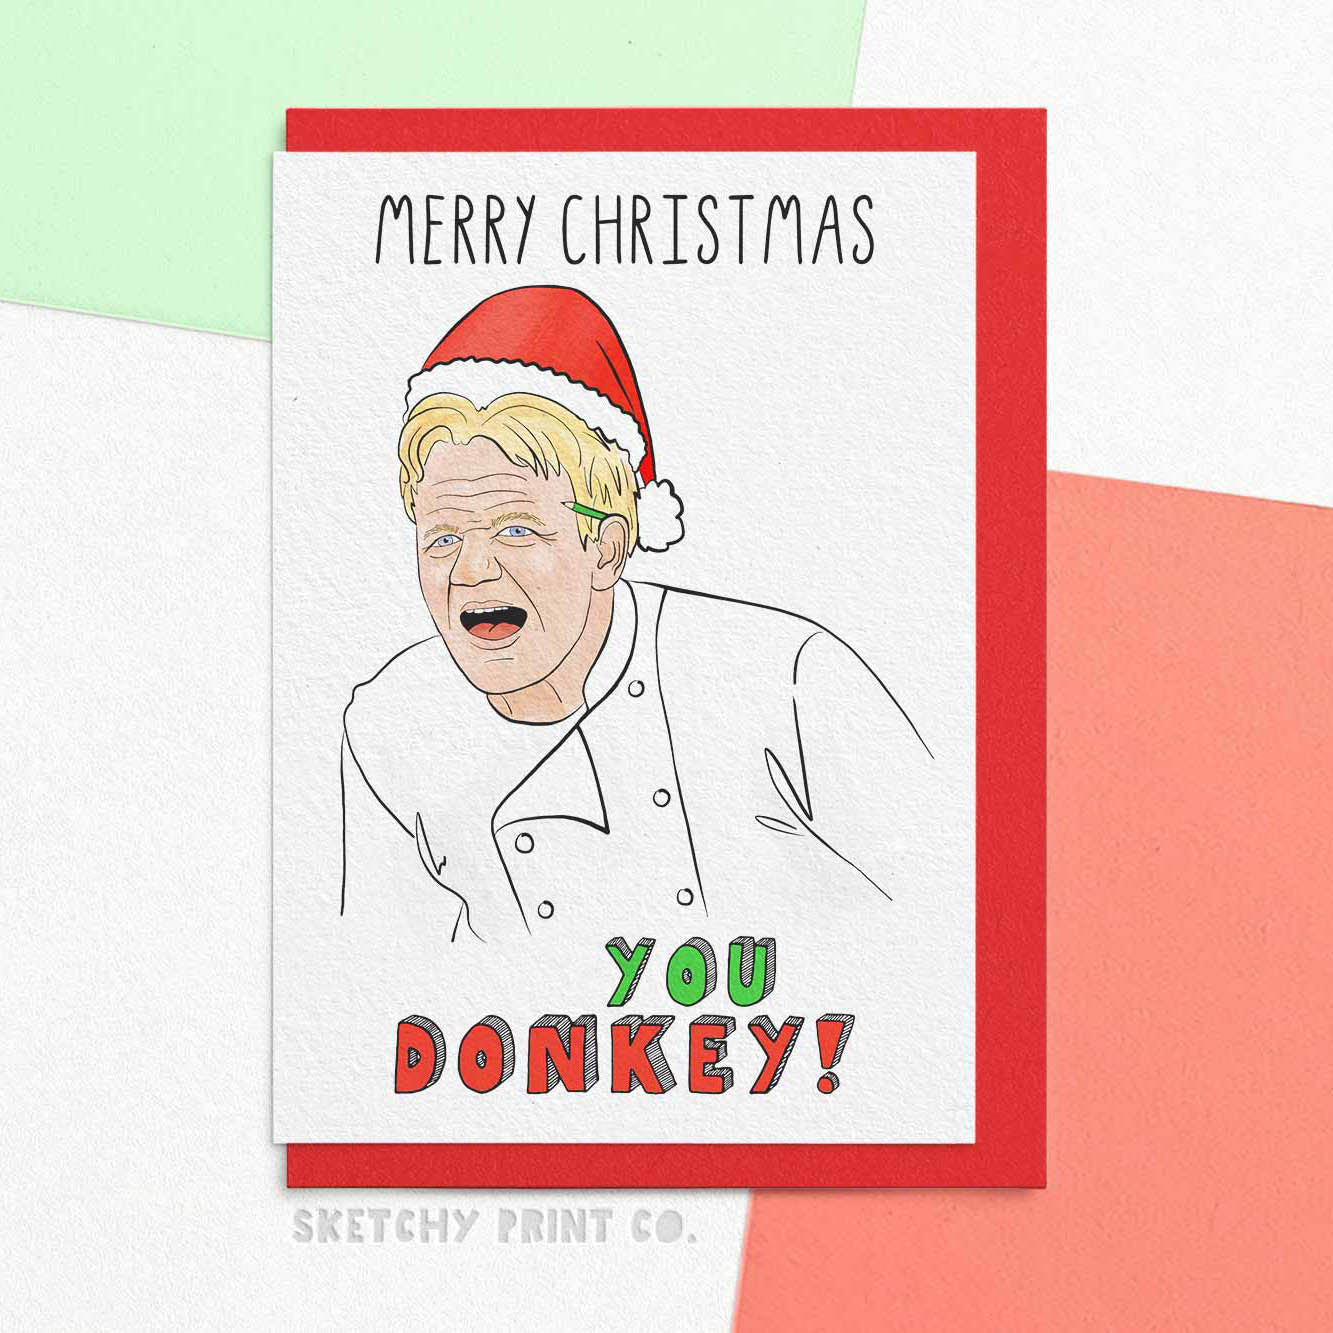 Gordon Ramsey Funny Rude Silly Christmas Cards boyfriend girlfriend unique gift unusual hilarious illustrated sketchy print co